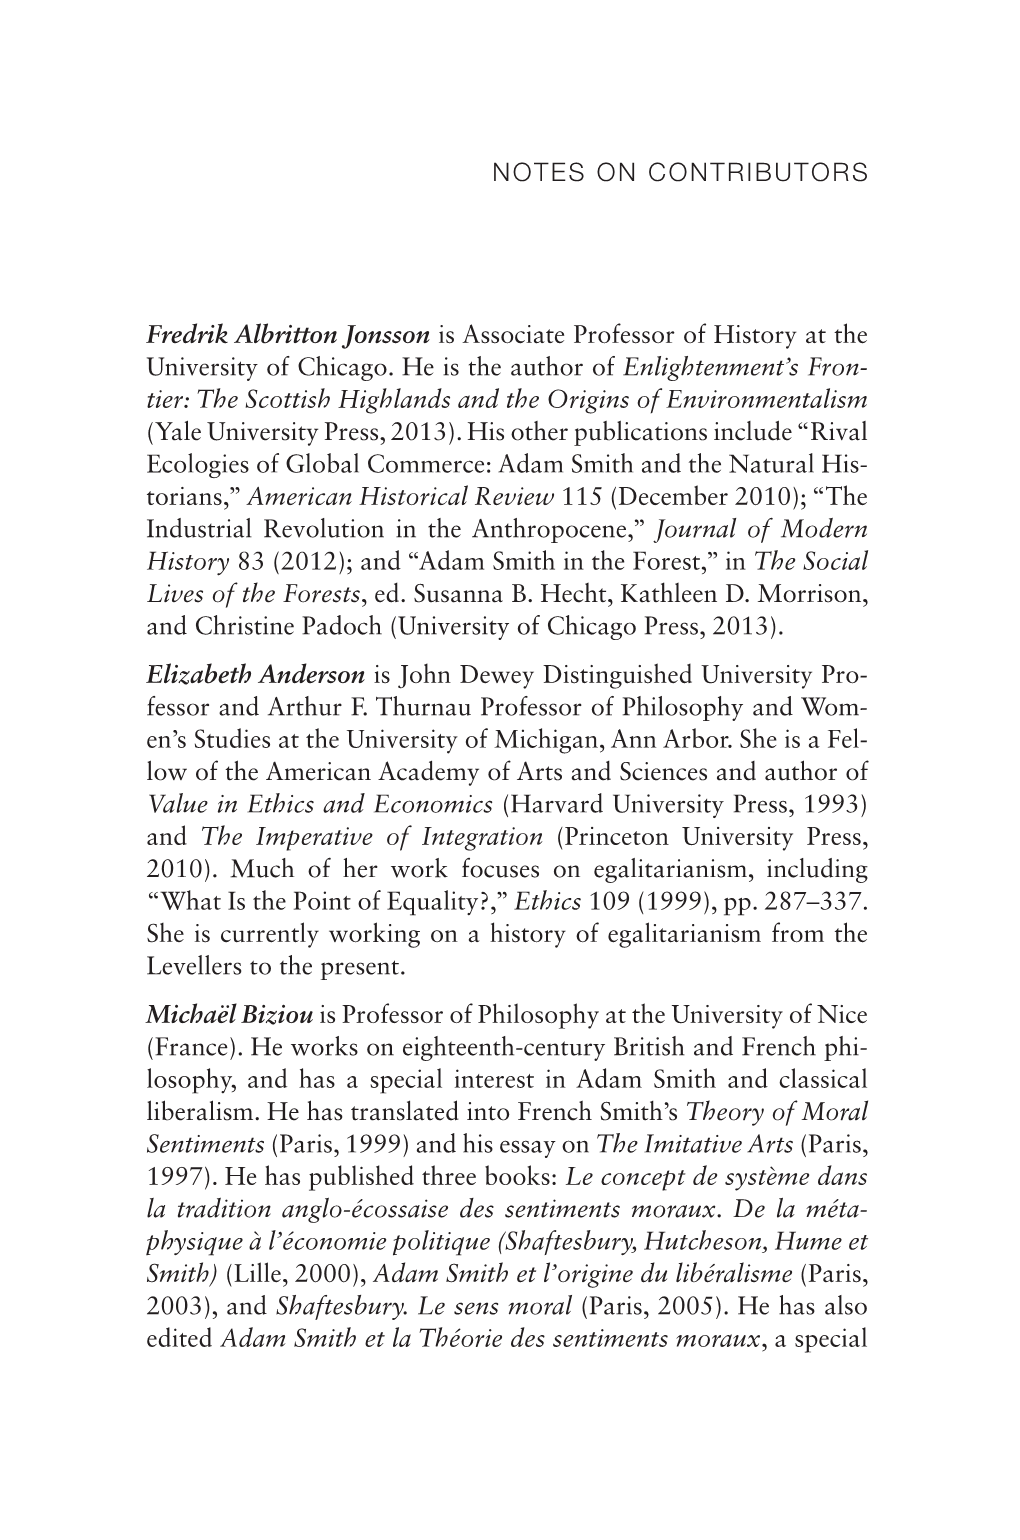 NOTES on CONTRIBUTORS Fredrik Albritton Jonsson Is Associate Professor of History at the University of Chicago. He Is the Author